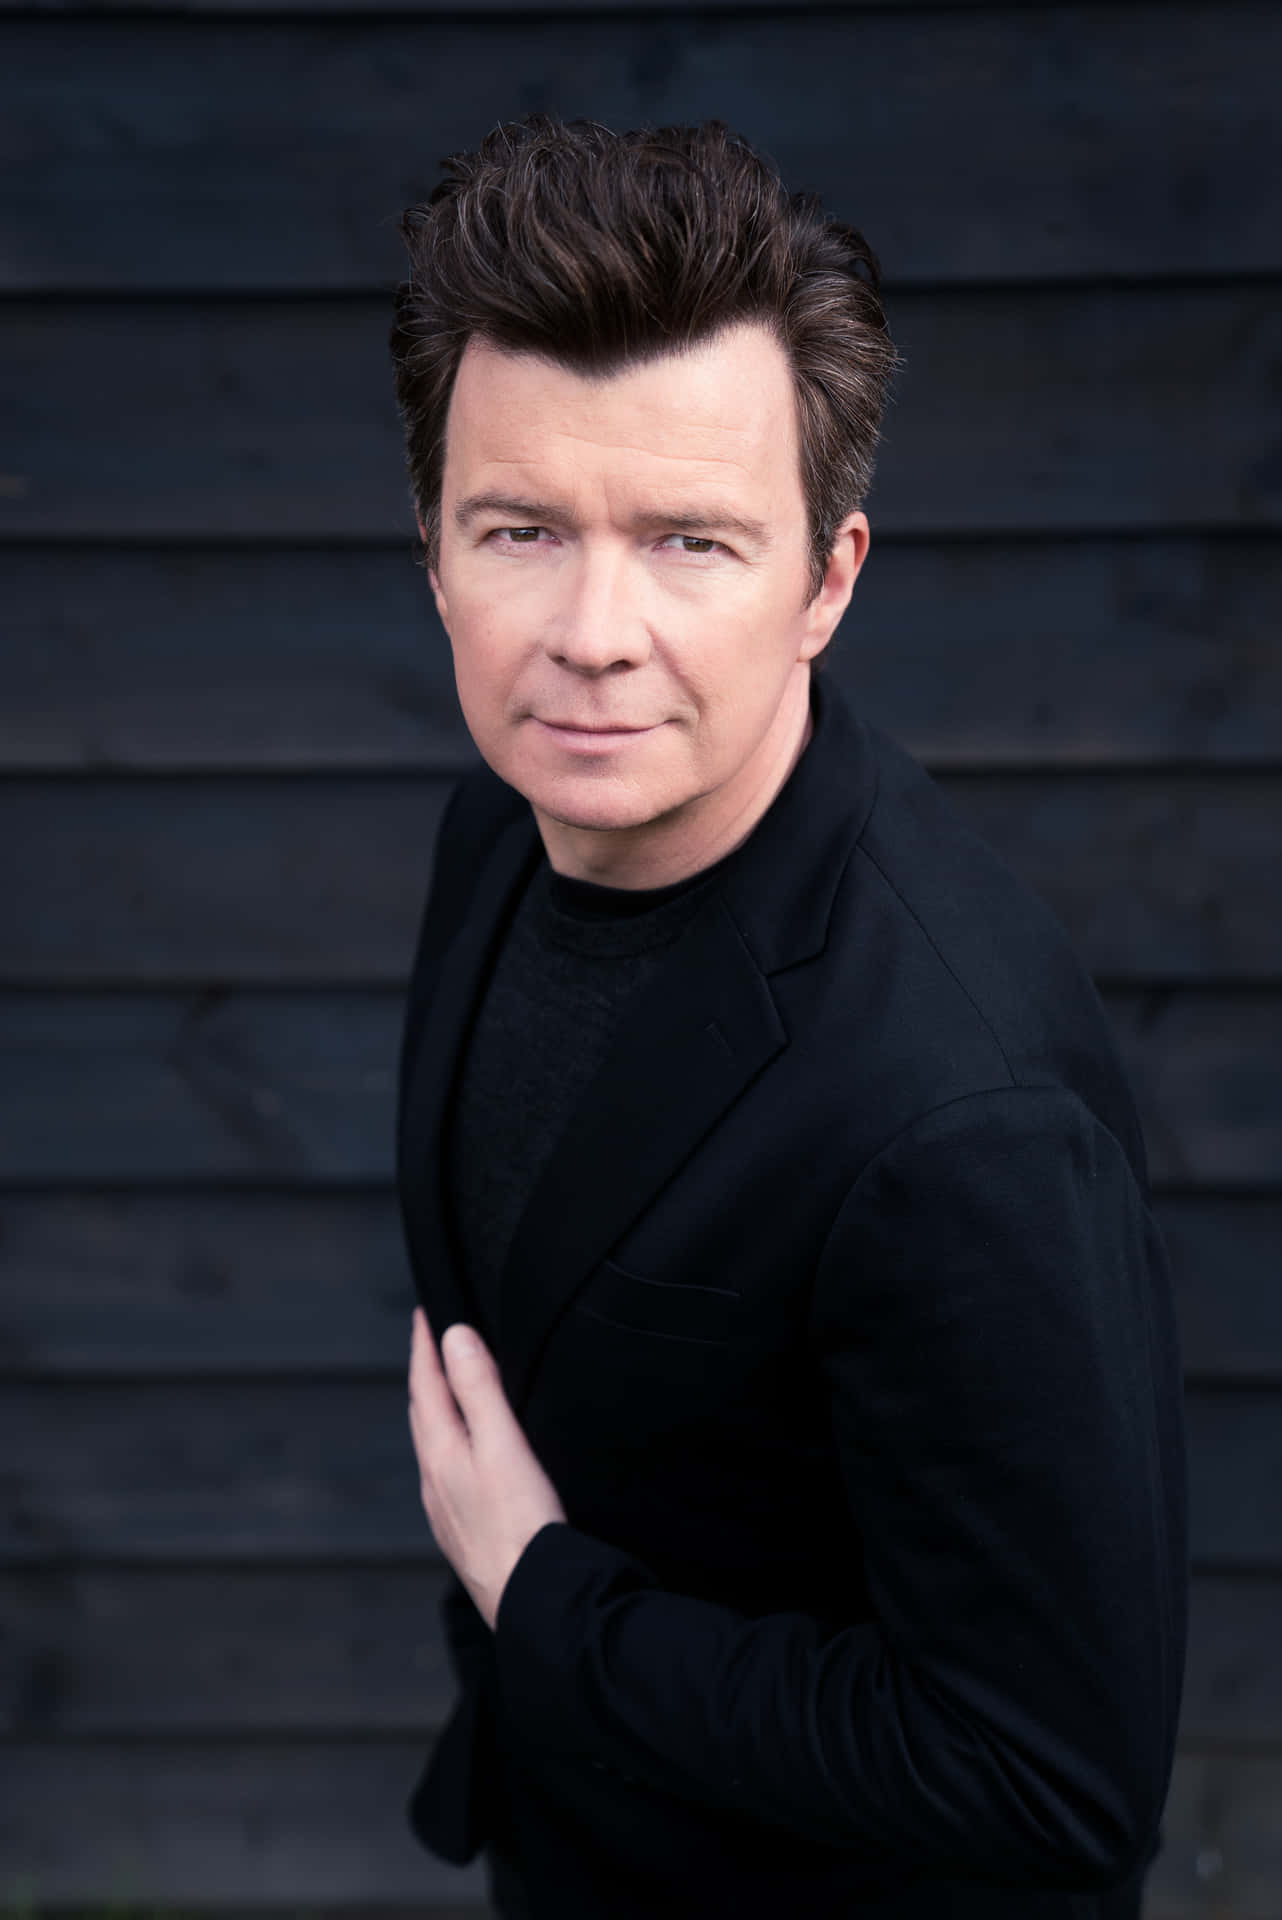 The Pop Star Rick Astley In His Signature Style.